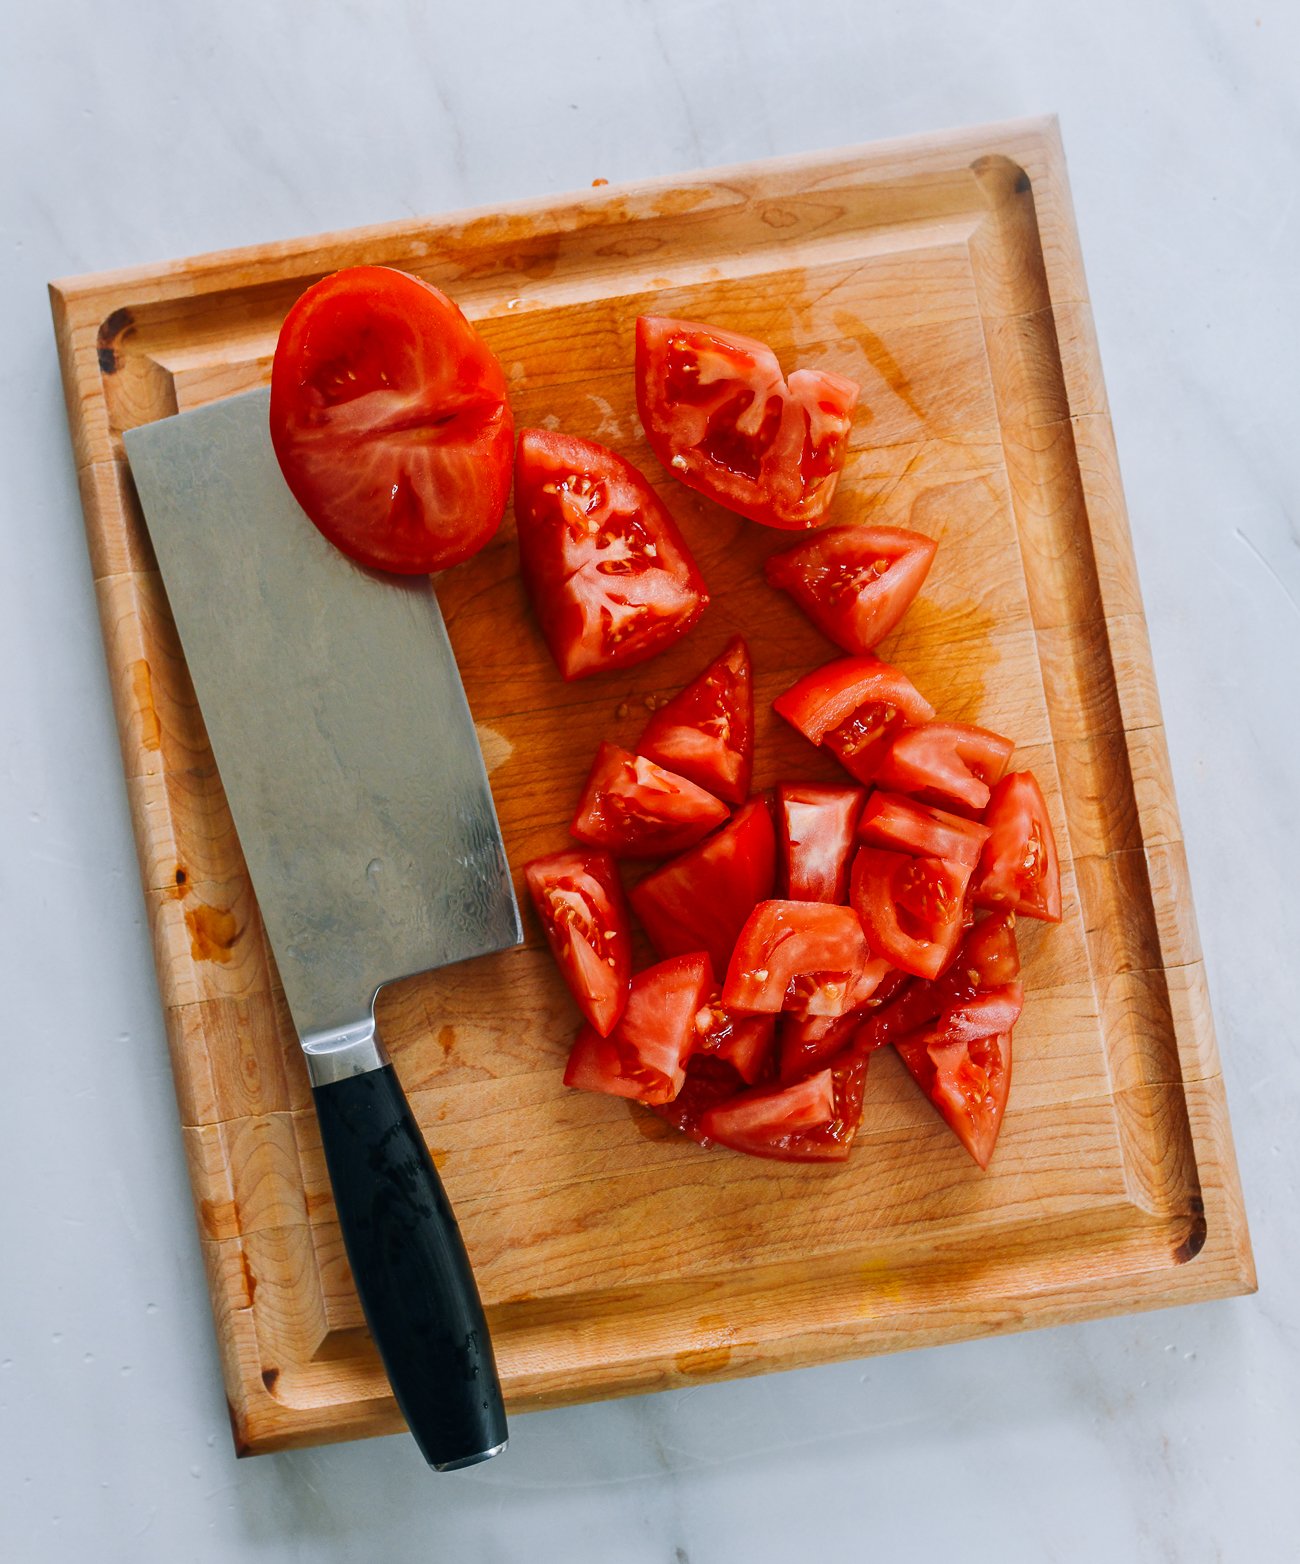 Cutting tomatoes into chunks with Chinese cleaver